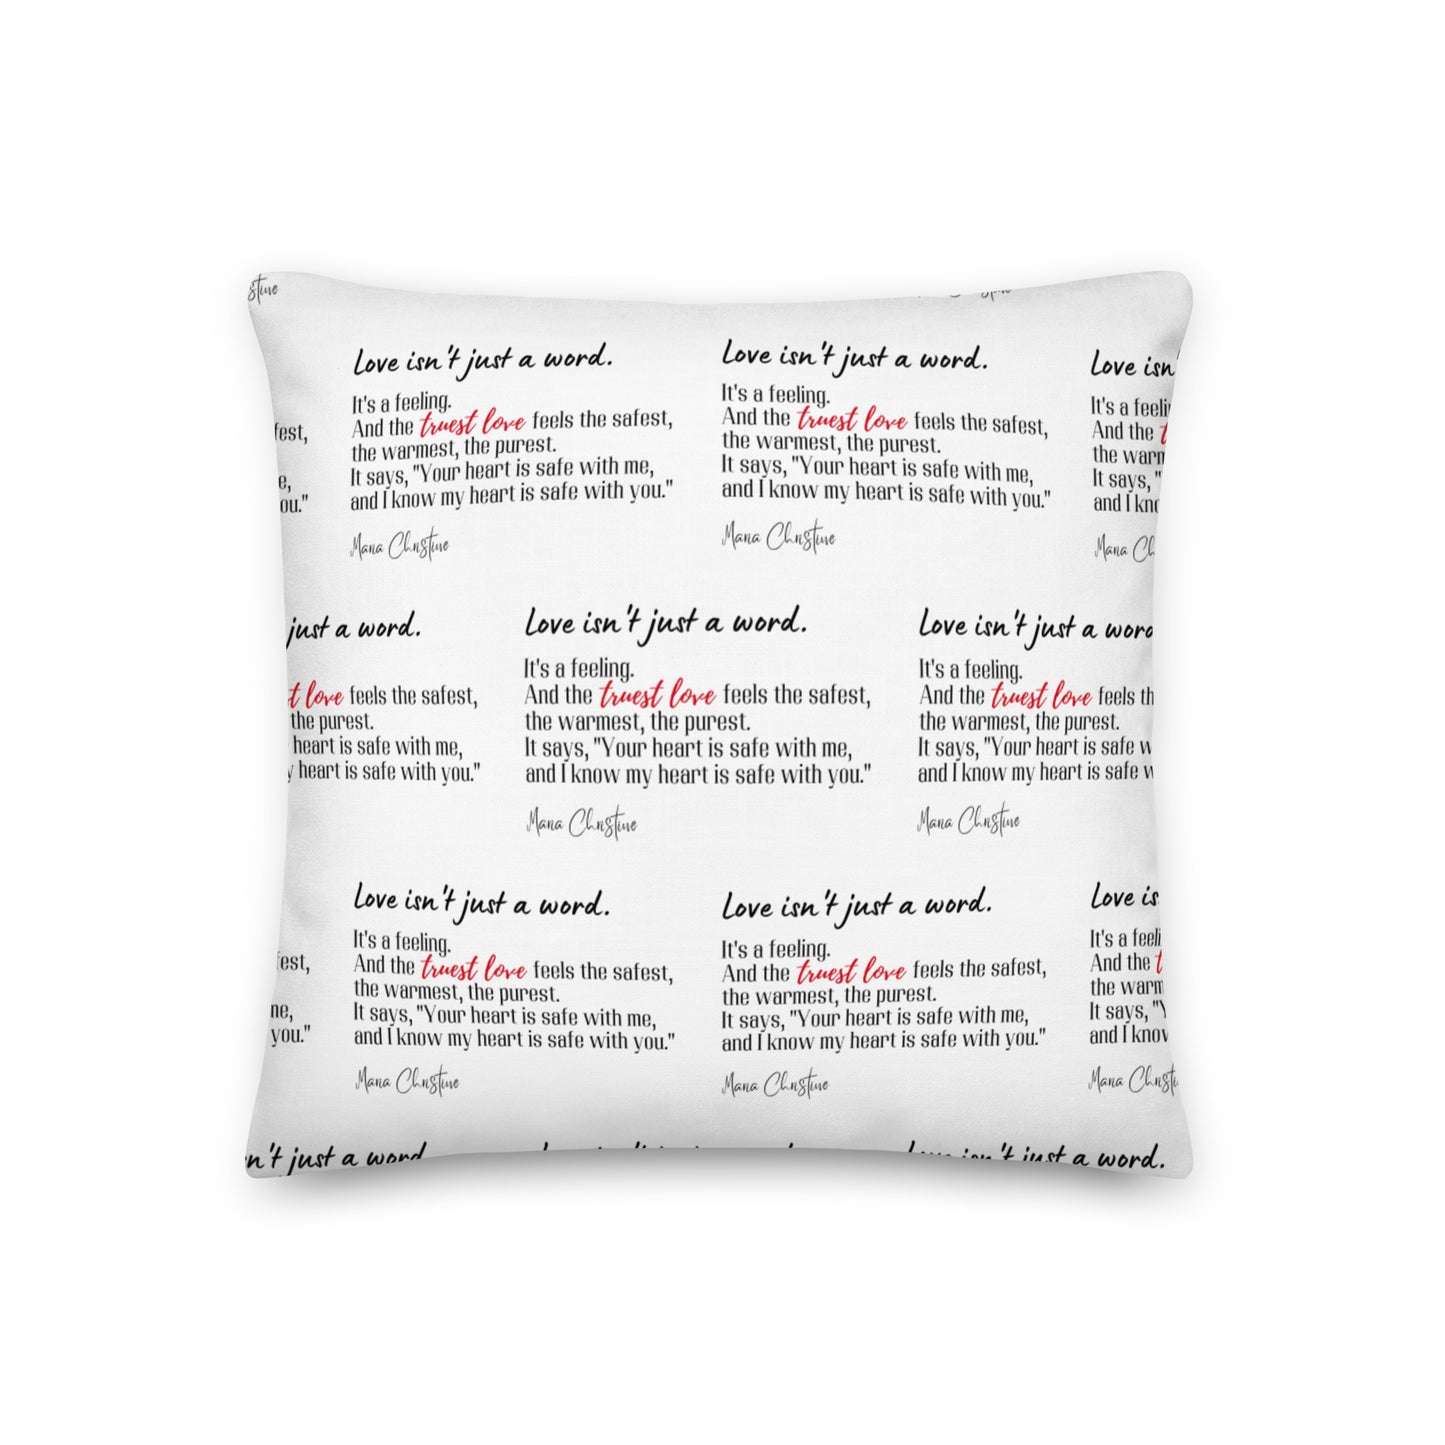 Premium Pillow: Love Isn't Just a Word (red highlight)